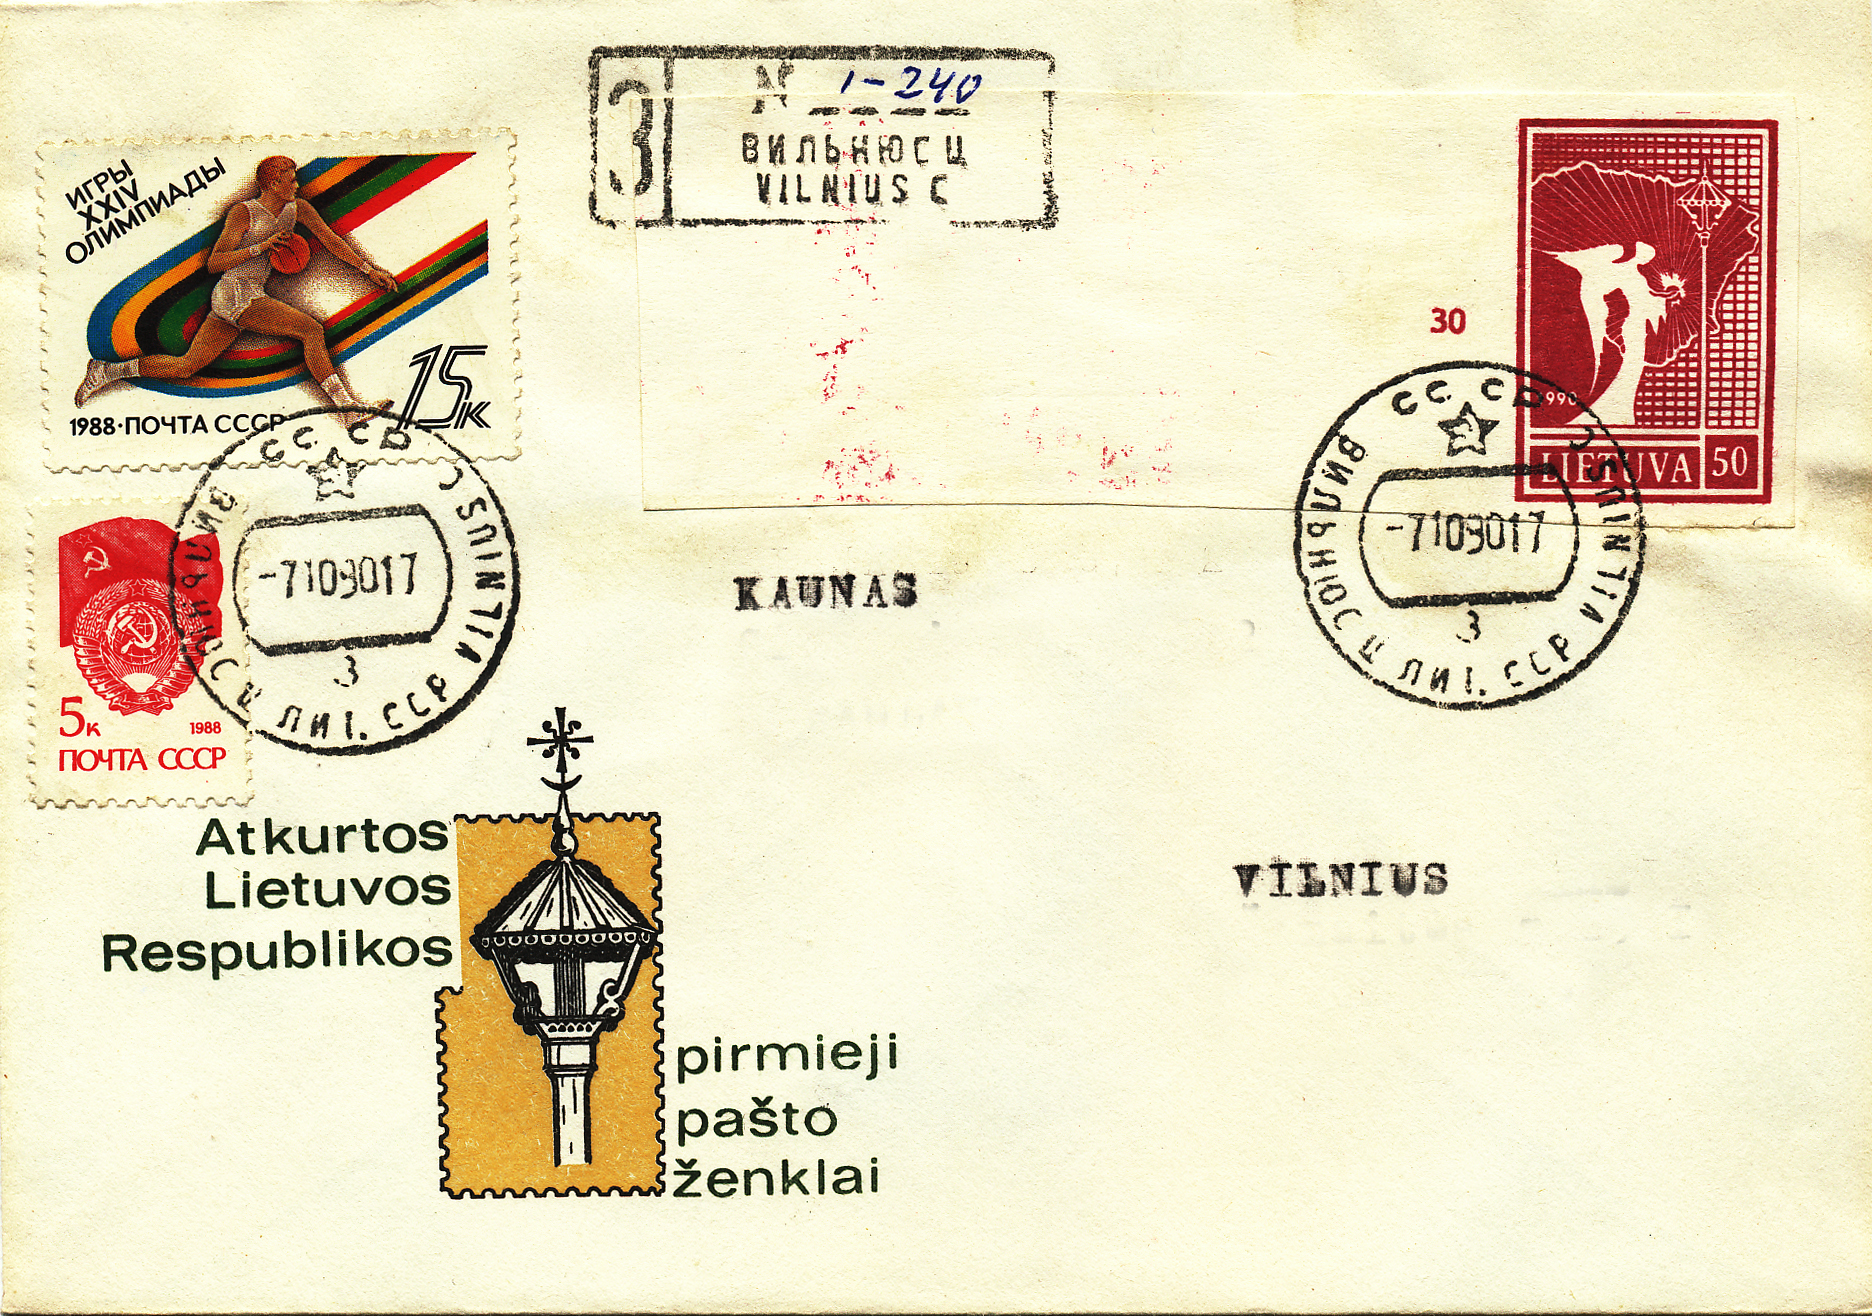 Mixed franking of Soviet stamps and the value of 50 kopecks from the first 'angel issue', cancelled with the Soviet postmark Vilnius C g of 7.10.90 on R-cover.